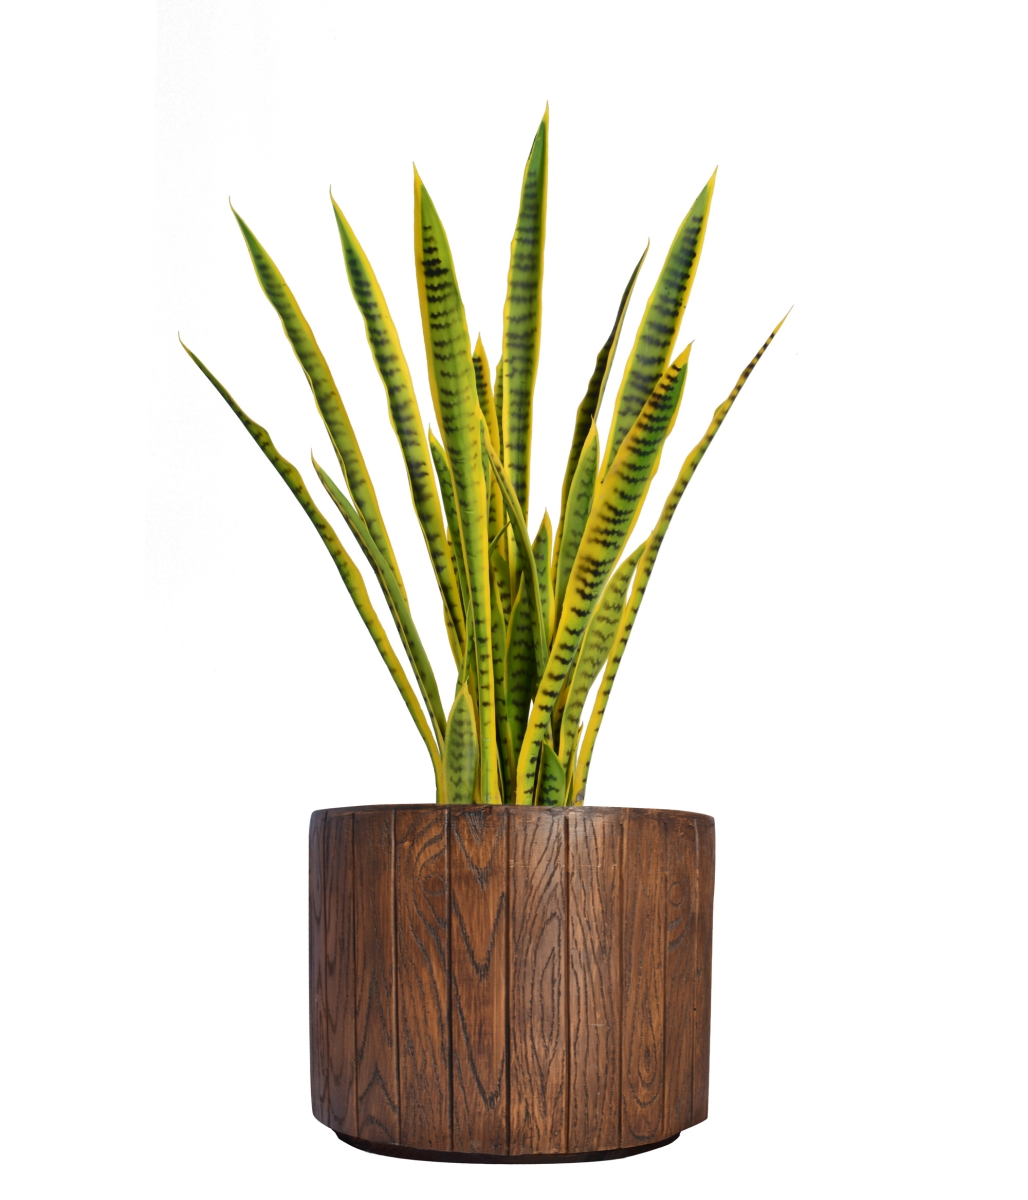 Vhx121202 40 In. Tall Snake Plant In Planter